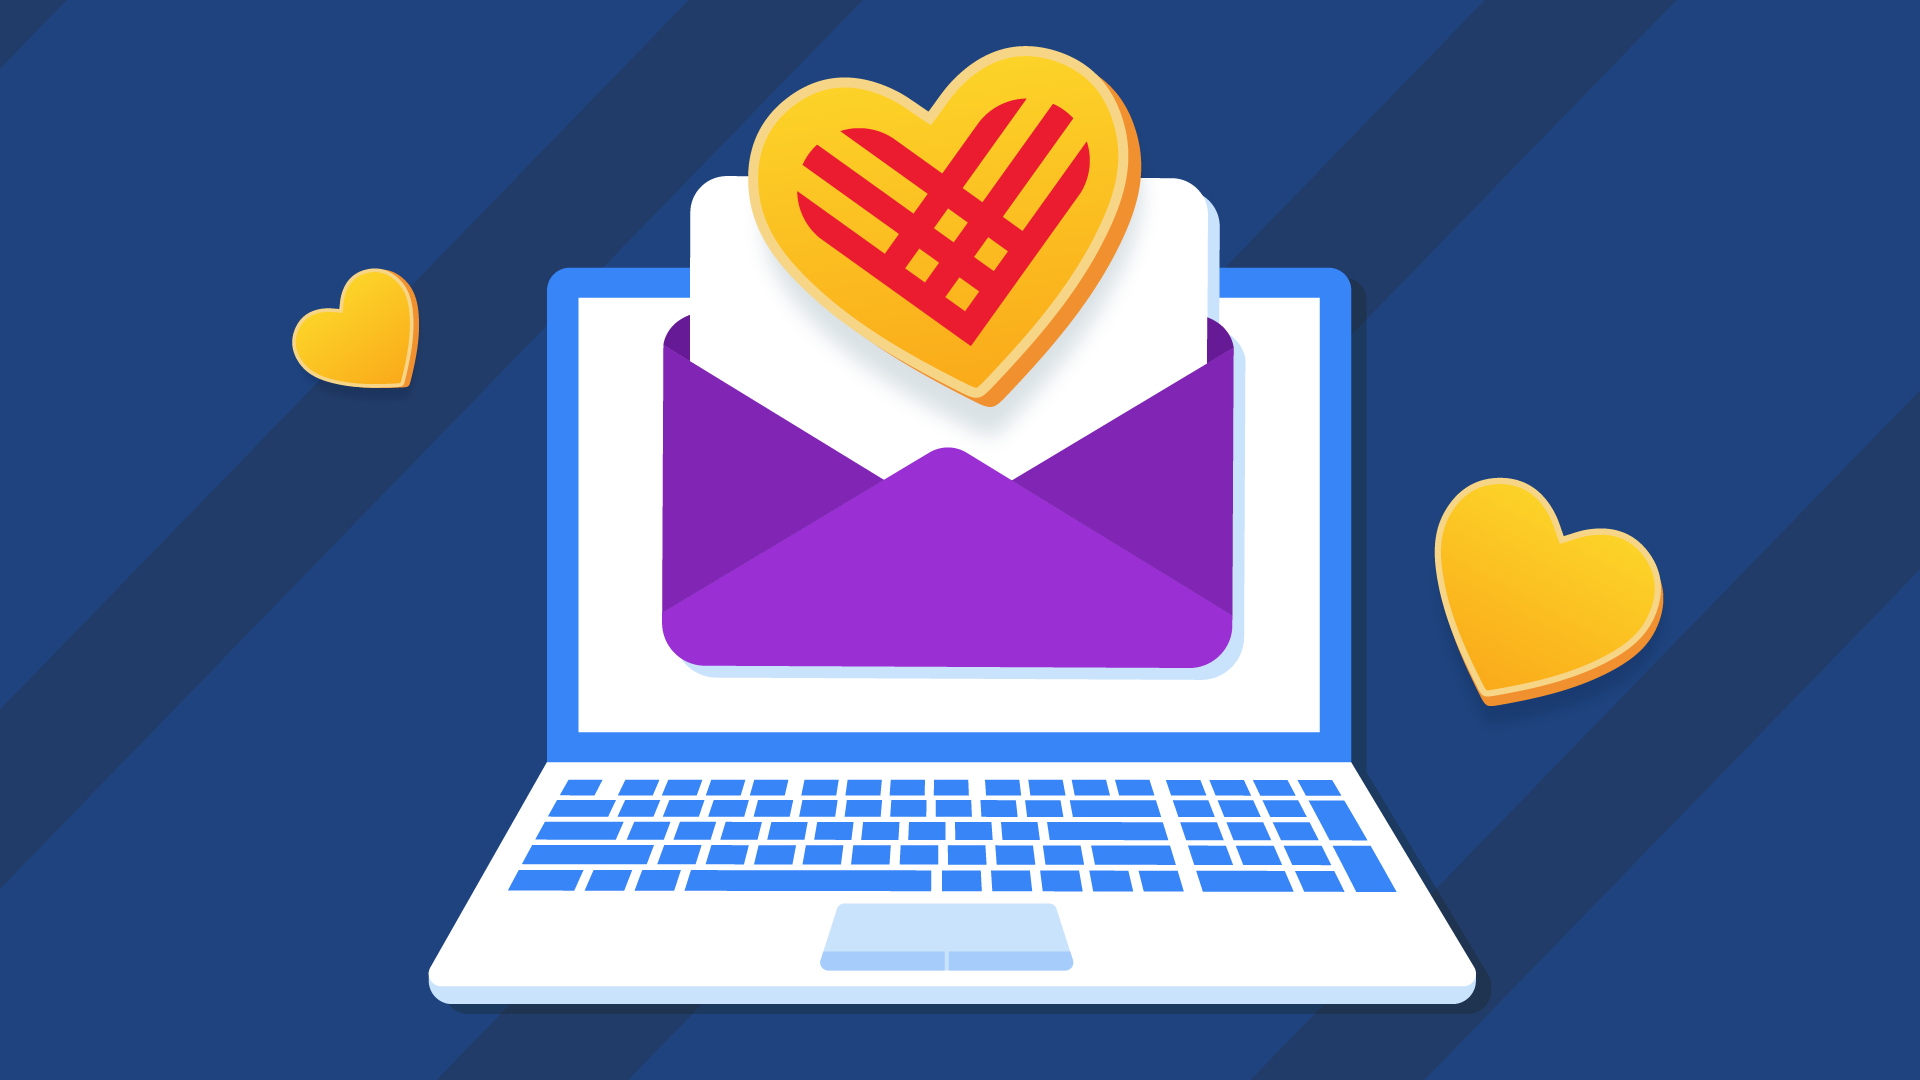 Unlock the power of GivingTuesday with these 7 highly effective email templates designed to engage and convert donors. Elevate your fundraising strategy today!